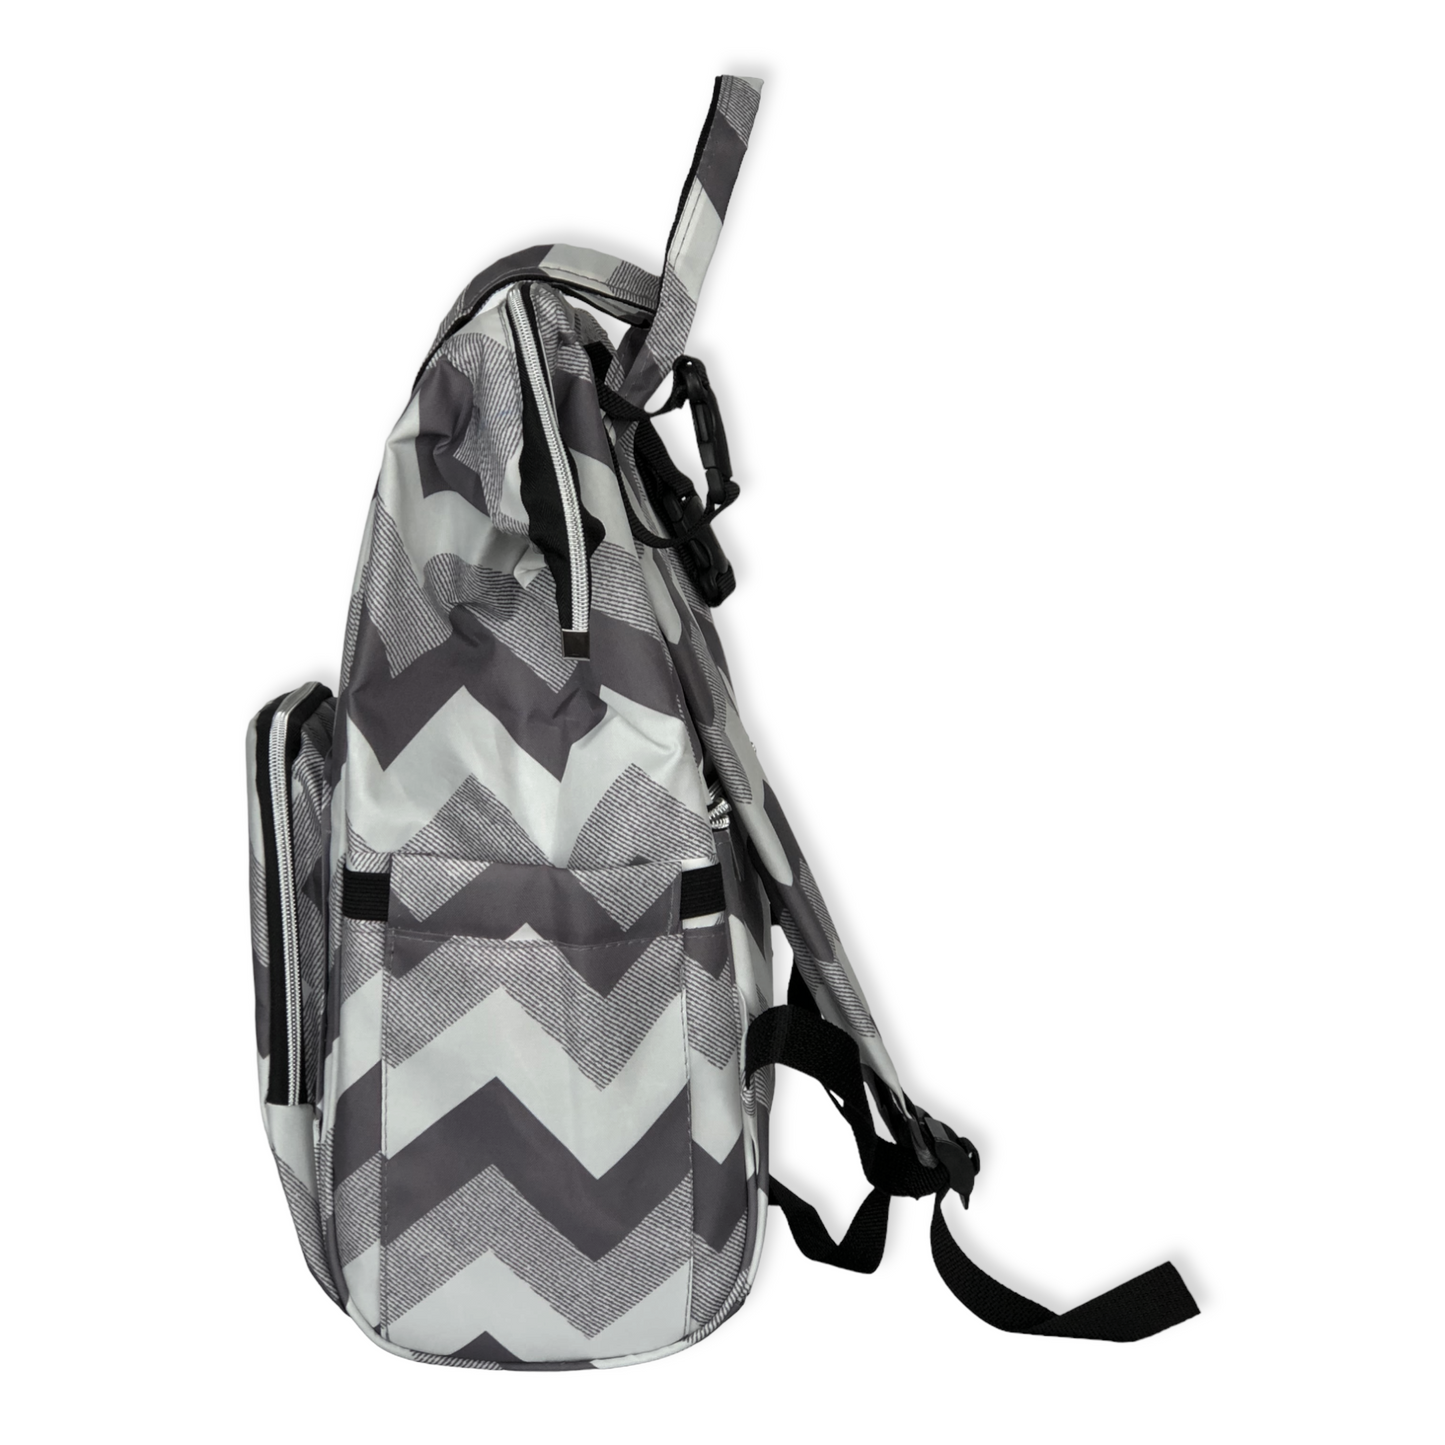 Grey Zigzag Pattern Mommy Bag-Bag, Bags, catbabygear, catbag, Changing, Diapers, Grey, Maternity, Nappy, Nursery, Travel-Safe Line-[Too Twee]-[Tootwee]-[baby]-[newborn]-[clothes]-[essentials]-[toys]-[Lebanon]